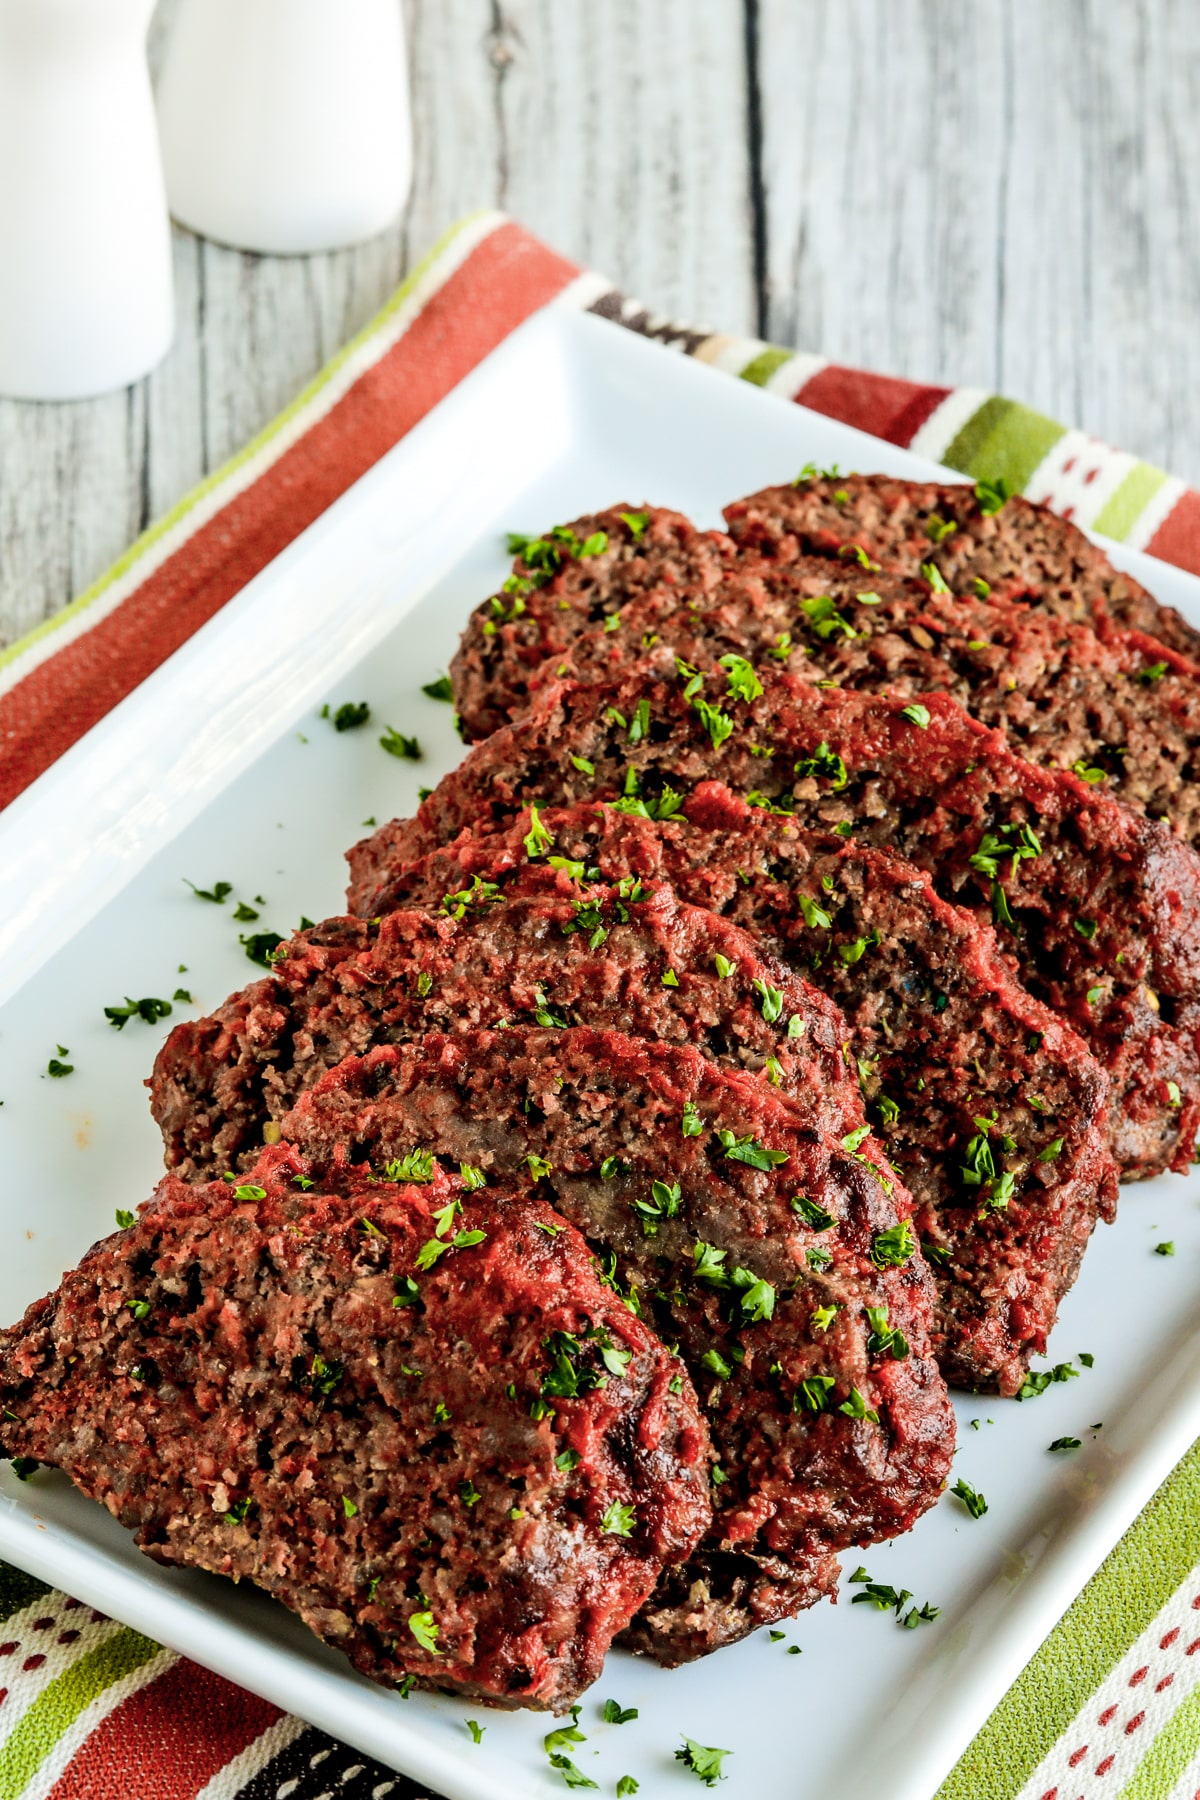 Beef and Sausage Italian Meatloaf shown on serving plate, sprinkled with parsley.